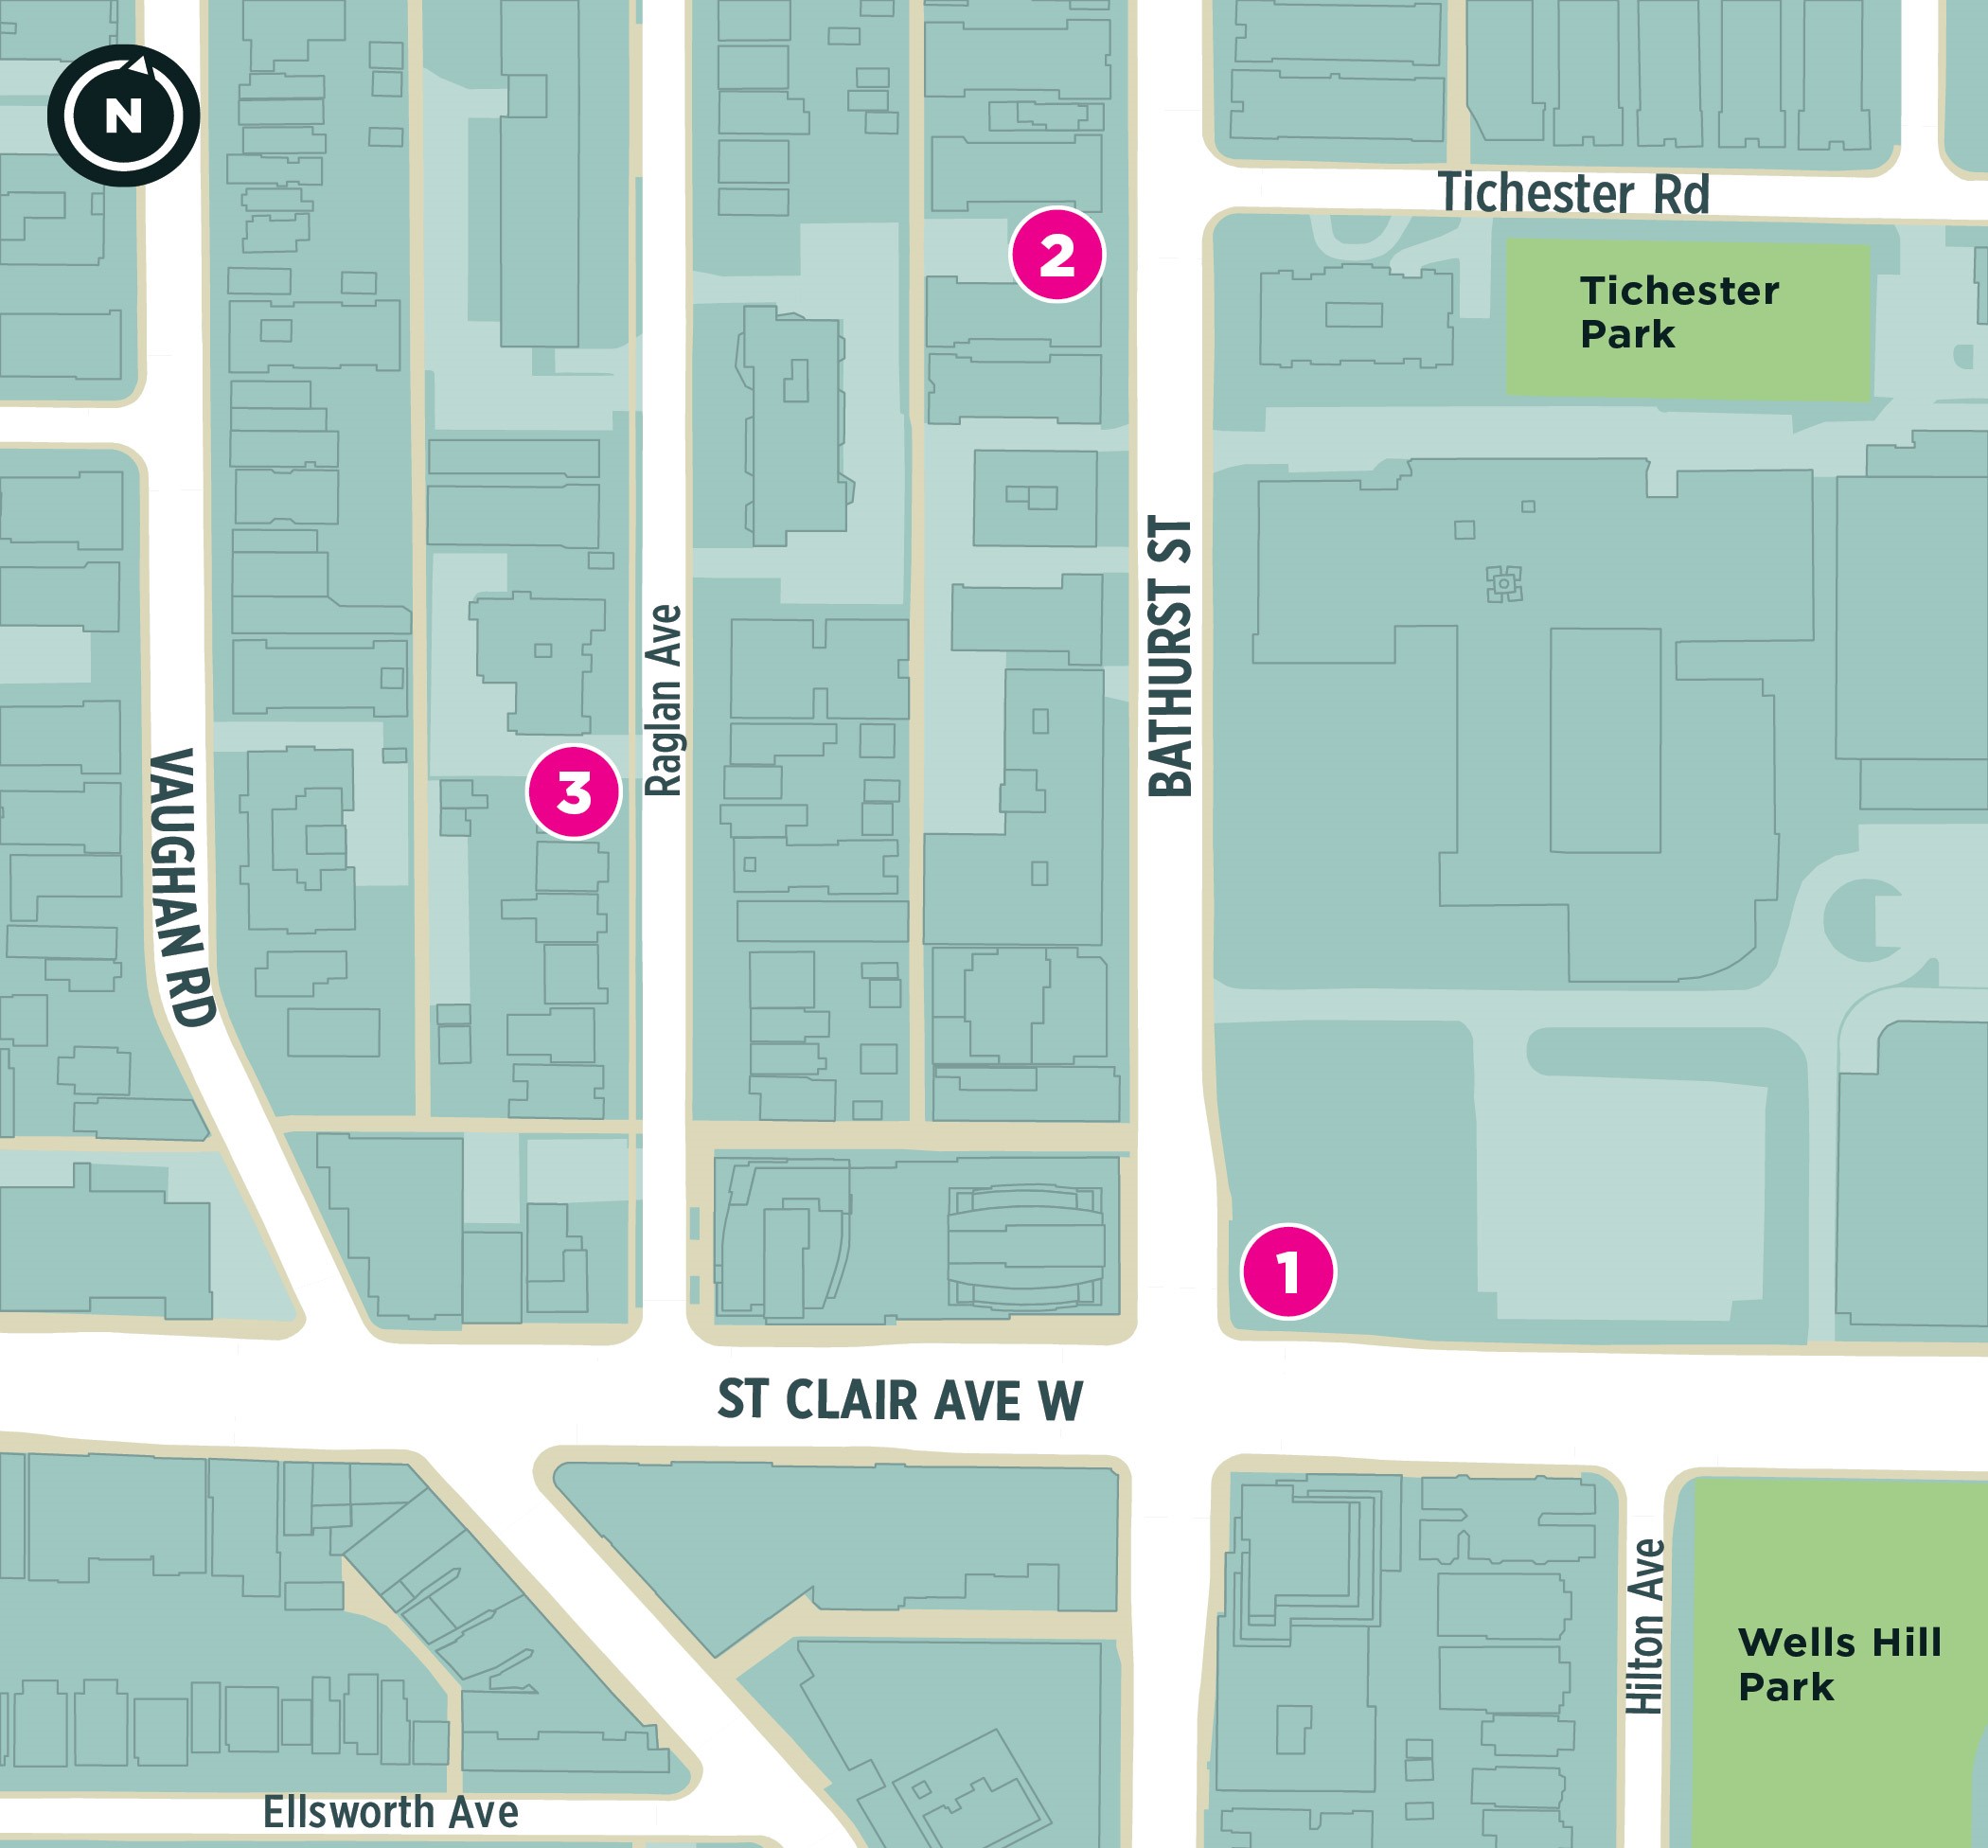 Map of Bathurst and St. Clair neighbourhood identifies the location of the three new parks with red stars on Raglan Avenue, north of St. Clair, at the north east corner of Bathurst and St. Clair, and on the west side of Bathurst at Tichester Rd.